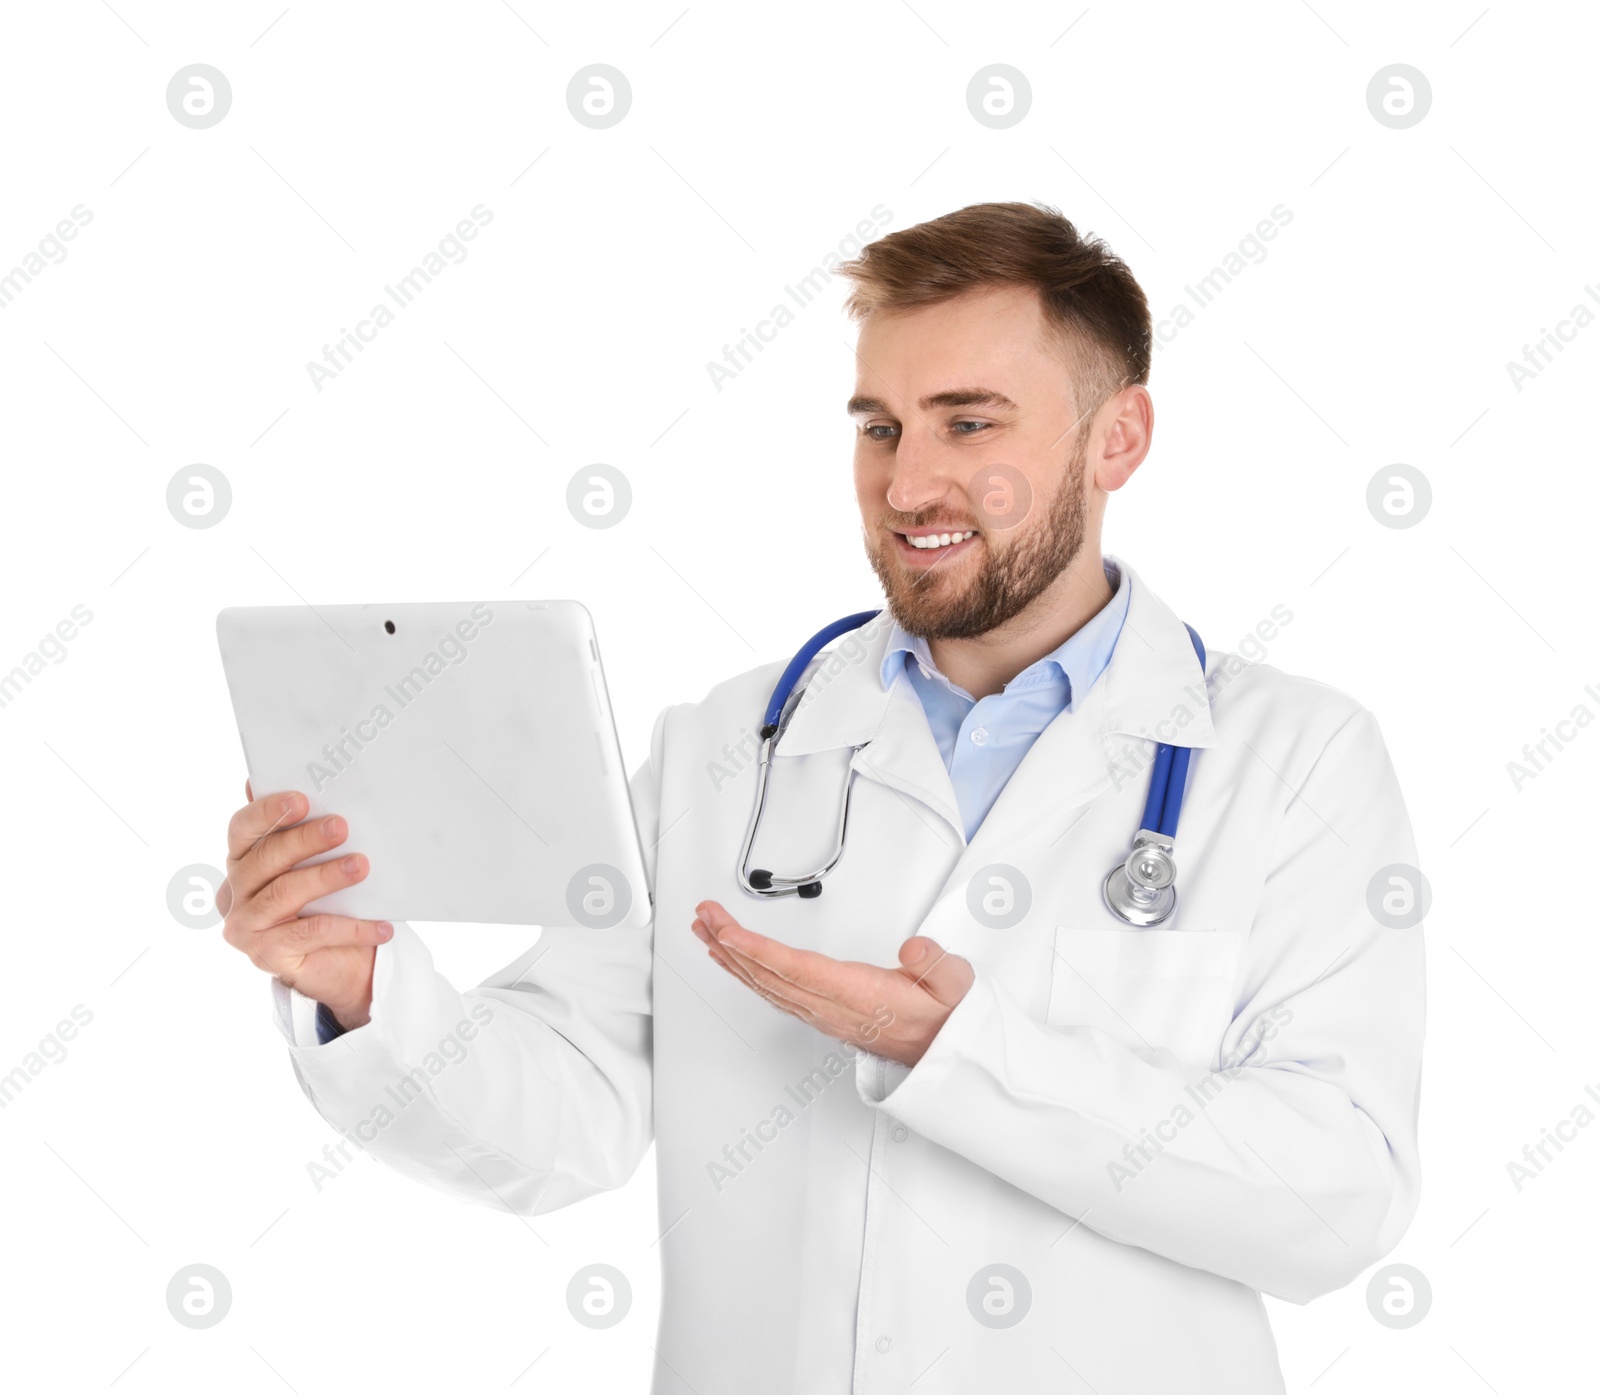 Photo of Male doctor using video chat on tablet against white background